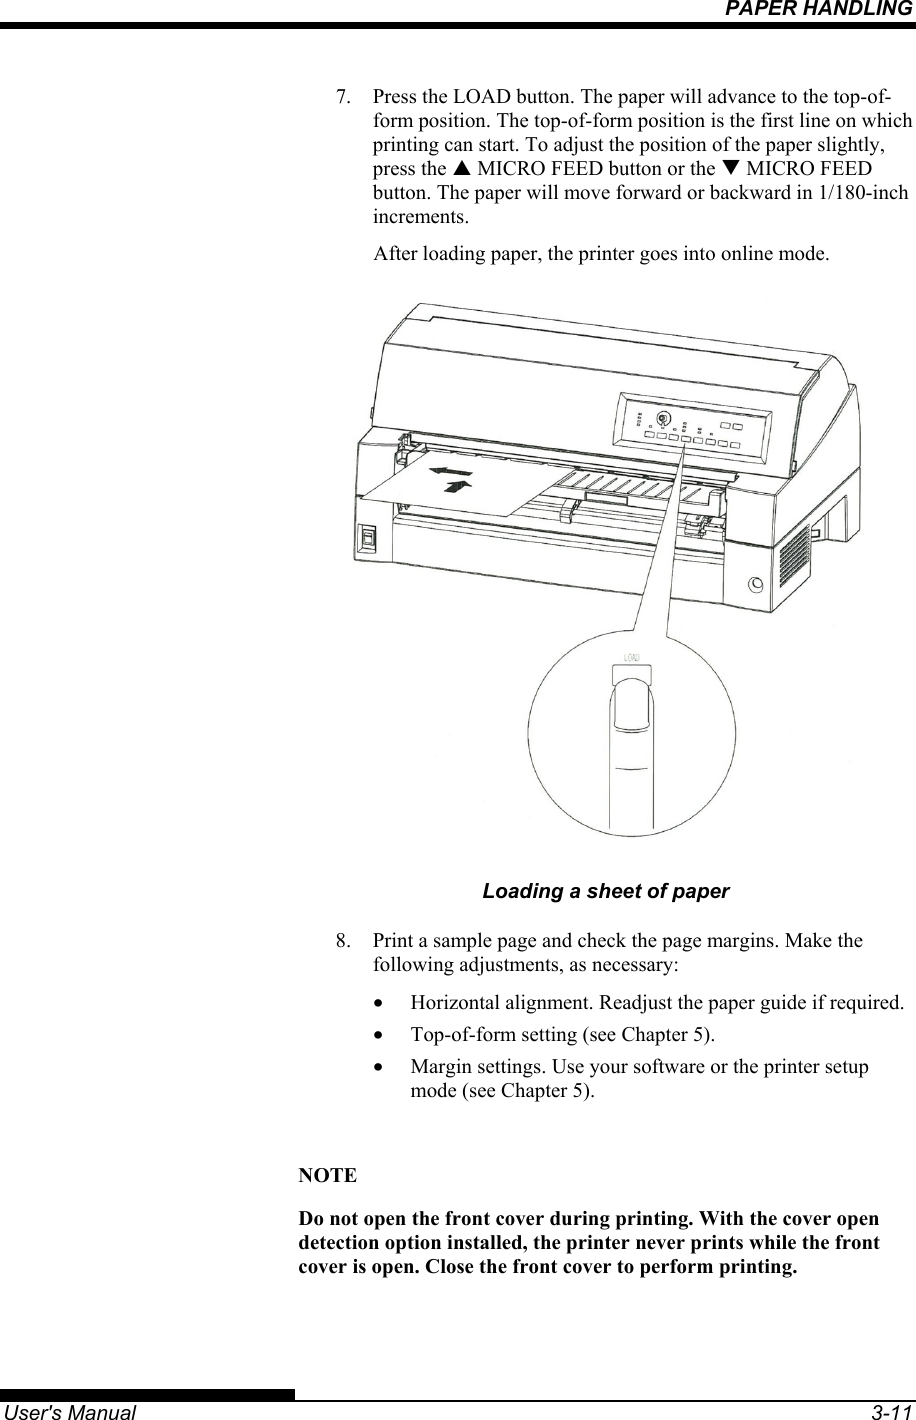 PAPER HANDLING   User&apos;s Manual  3-11 7.  Press the LOAD button. The paper will advance to the top-of-form position. The top-of-form position is the first line on which printing can start. To adjust the position of the paper slightly, press the S MICRO FEED button or the T MICRO FEED button. The paper will move forward or backward in 1/180-inch increments. After loading paper, the printer goes into online mode.  Loading a sheet of paper 8.  Print a sample page and check the page margins. Make the following adjustments, as necessary: •  Horizontal alignment. Readjust the paper guide if required. •  Top-of-form setting (see Chapter 5). •  Margin settings. Use your software or the printer setup mode (see Chapter 5).  NOTE Do not open the front cover during printing. With the cover open detection option installed, the printer never prints while the front cover is open. Close the front cover to perform printing. 